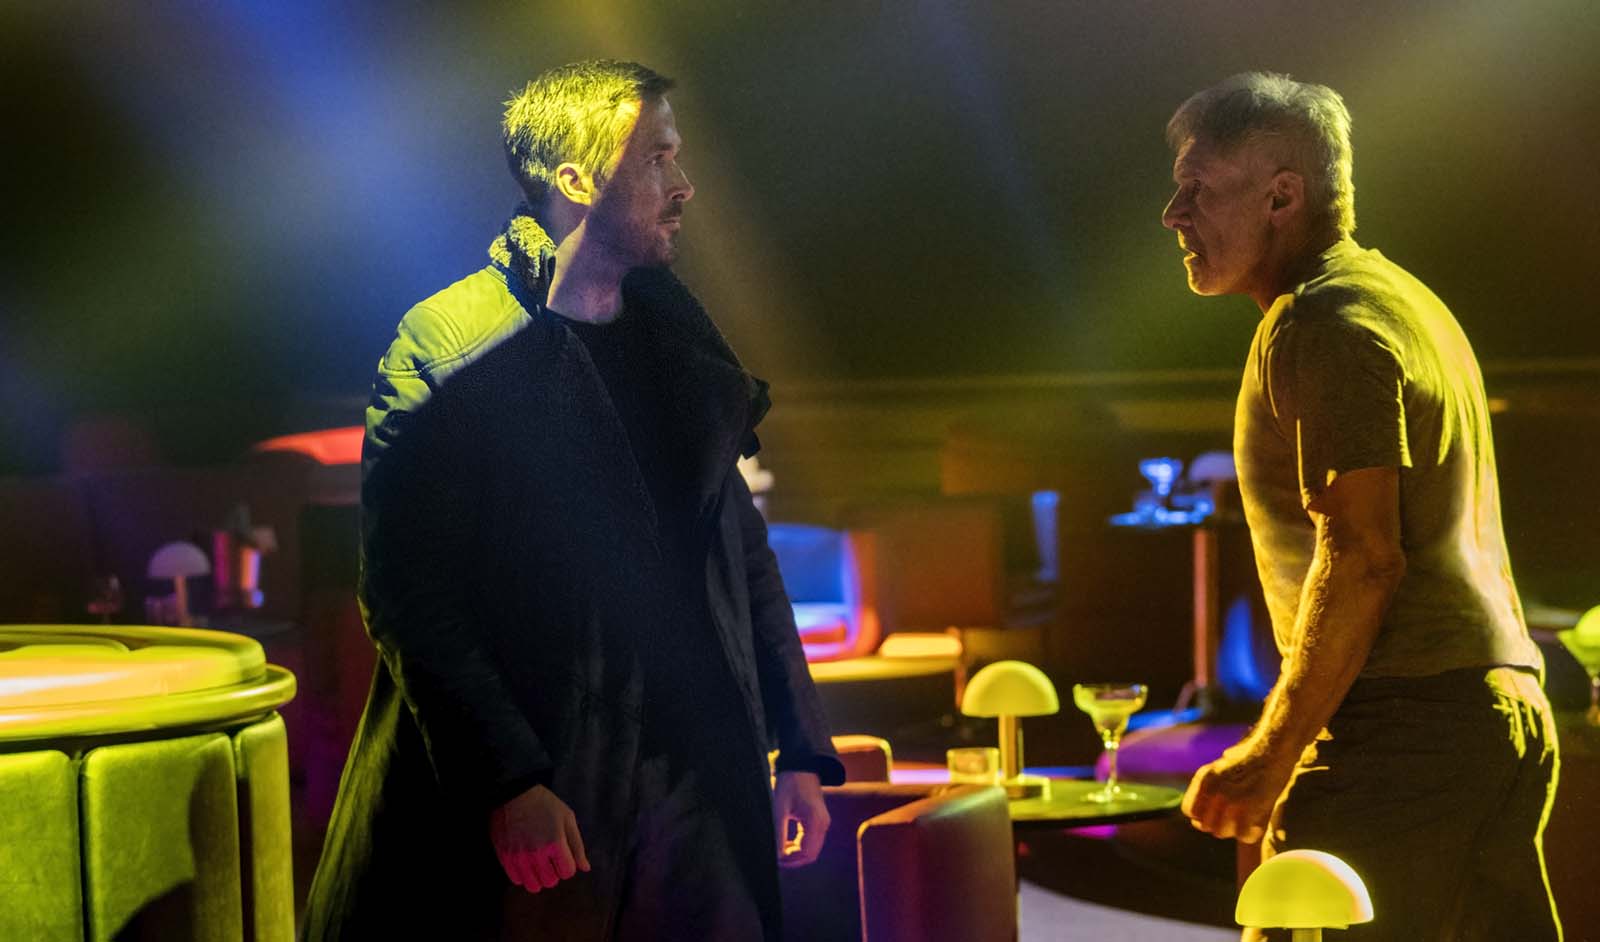 Ryan Gosling and Harrison Ford star in Alcon EntertainmentÕs sci fi thriller BLADE RUNNER 2049 in association with Columbia Pictures, domestic distribution by Warner Bros. Pictures and international distribution by Sony Pictures Releasing International.